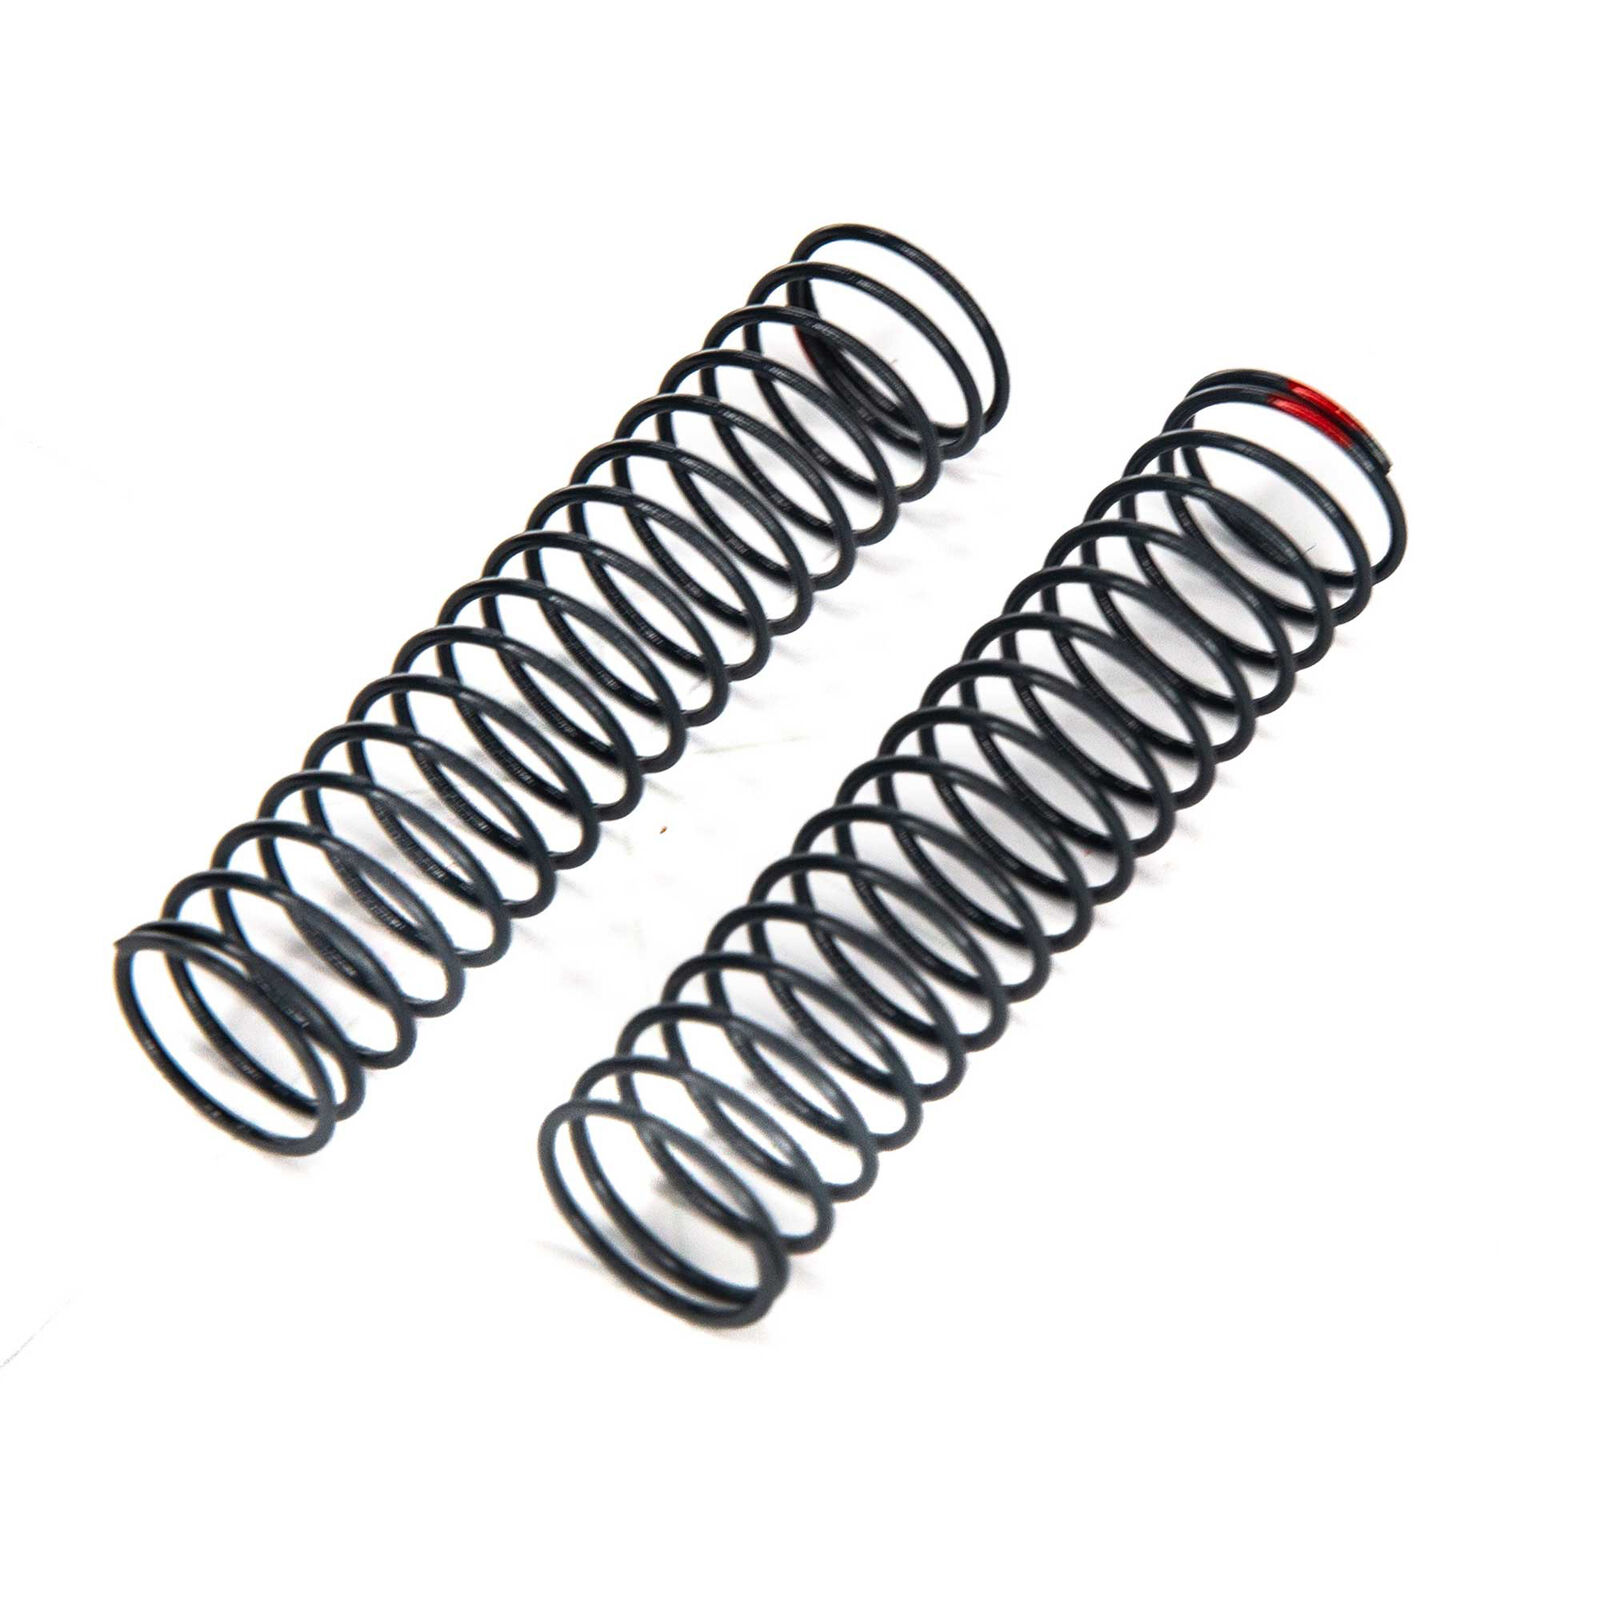 AXIAL Spring 13x62mm 1.3 lbs/in,Red (2)